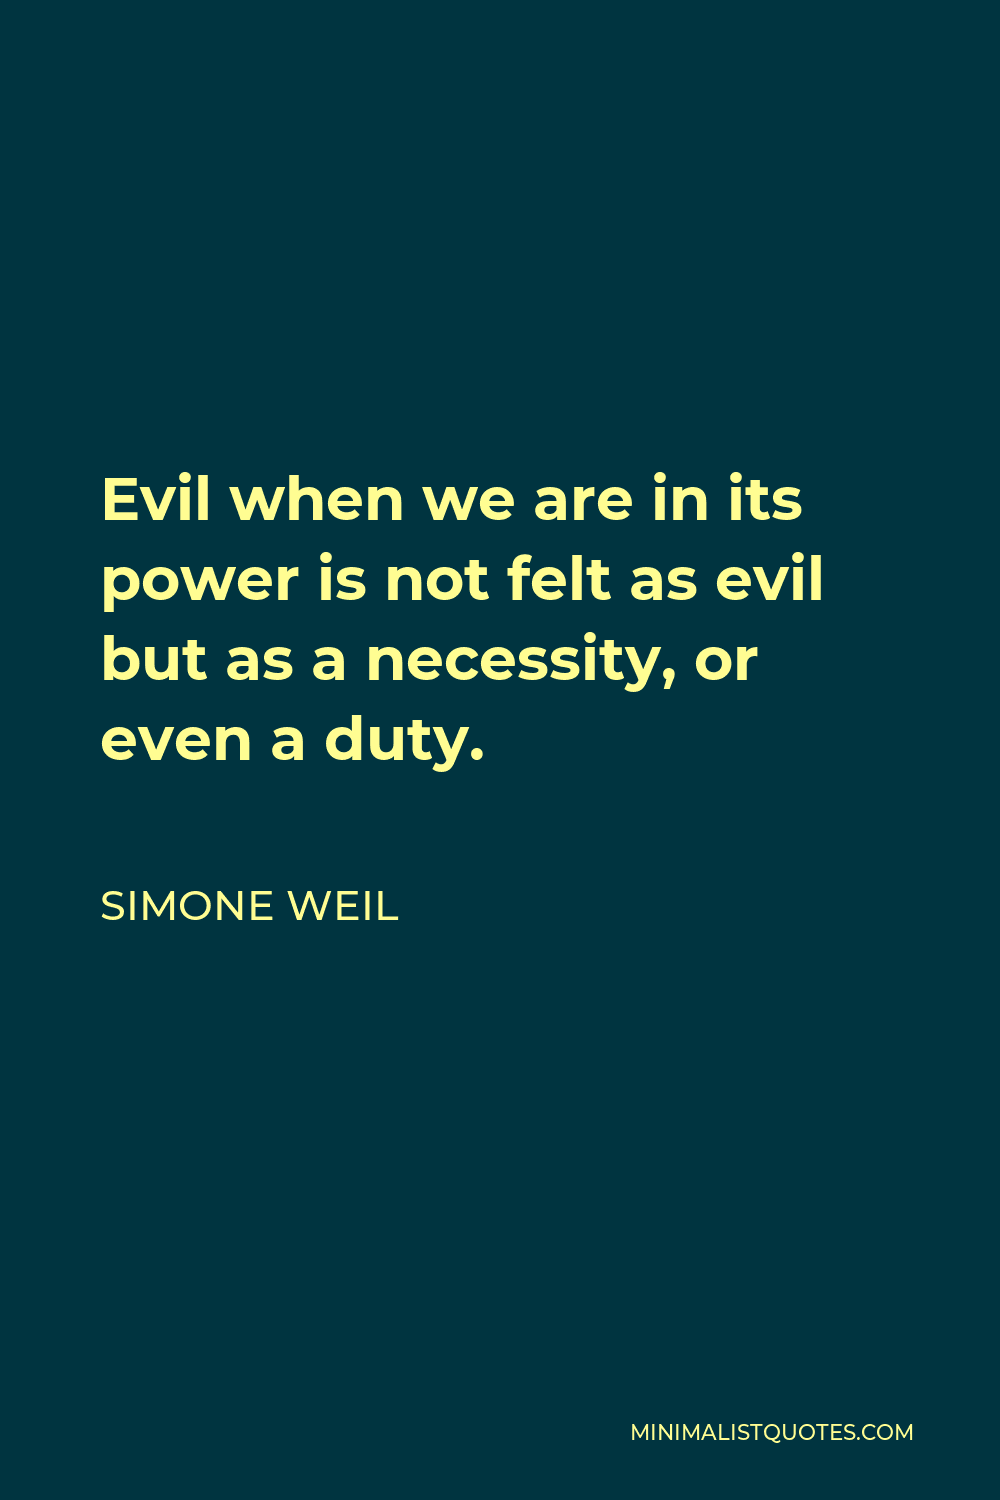 Simone Weil Quote - Evil when we are in its power is not felt as evil but as a necessity, or even a duty.